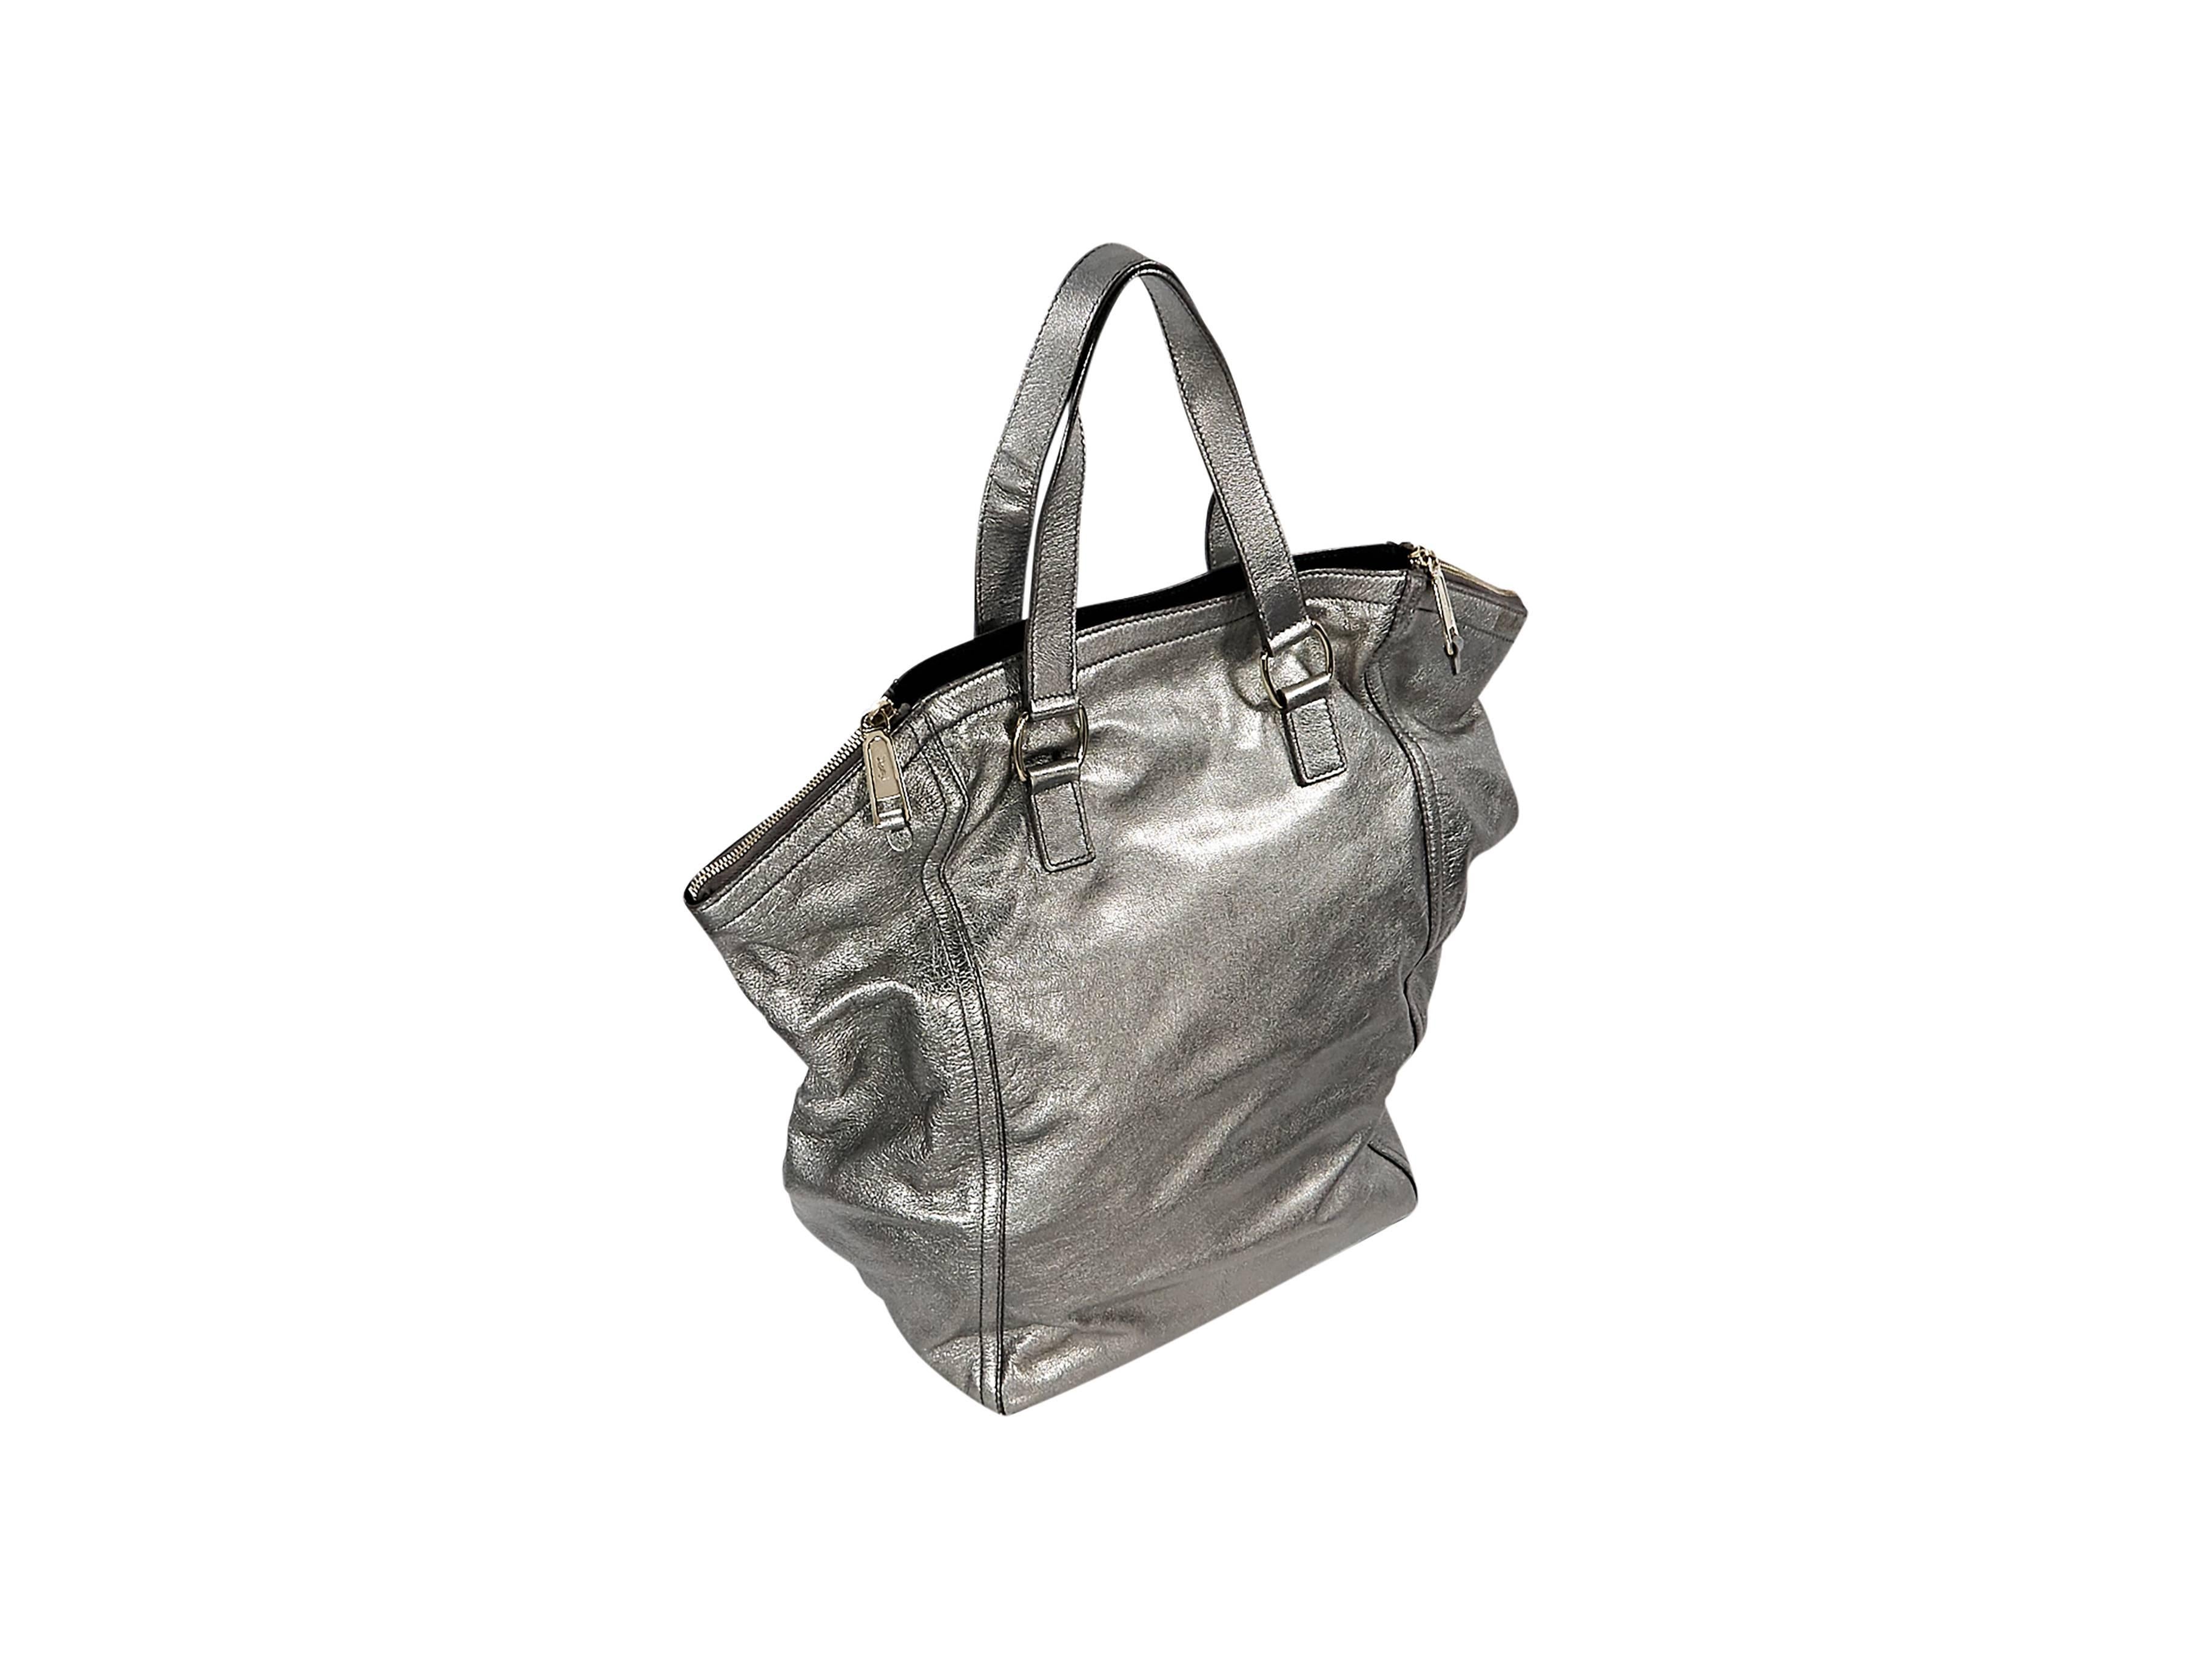 Product details:  Metallic silver leather Downtown bag by Yves Saint Laurent.  Dual carry handles.  Side top zip closures with open center.  Lined interior with inner zip pocket.  Goldtone hardware.  
Condition: Pre-owned. Very good.

Est. Retail $